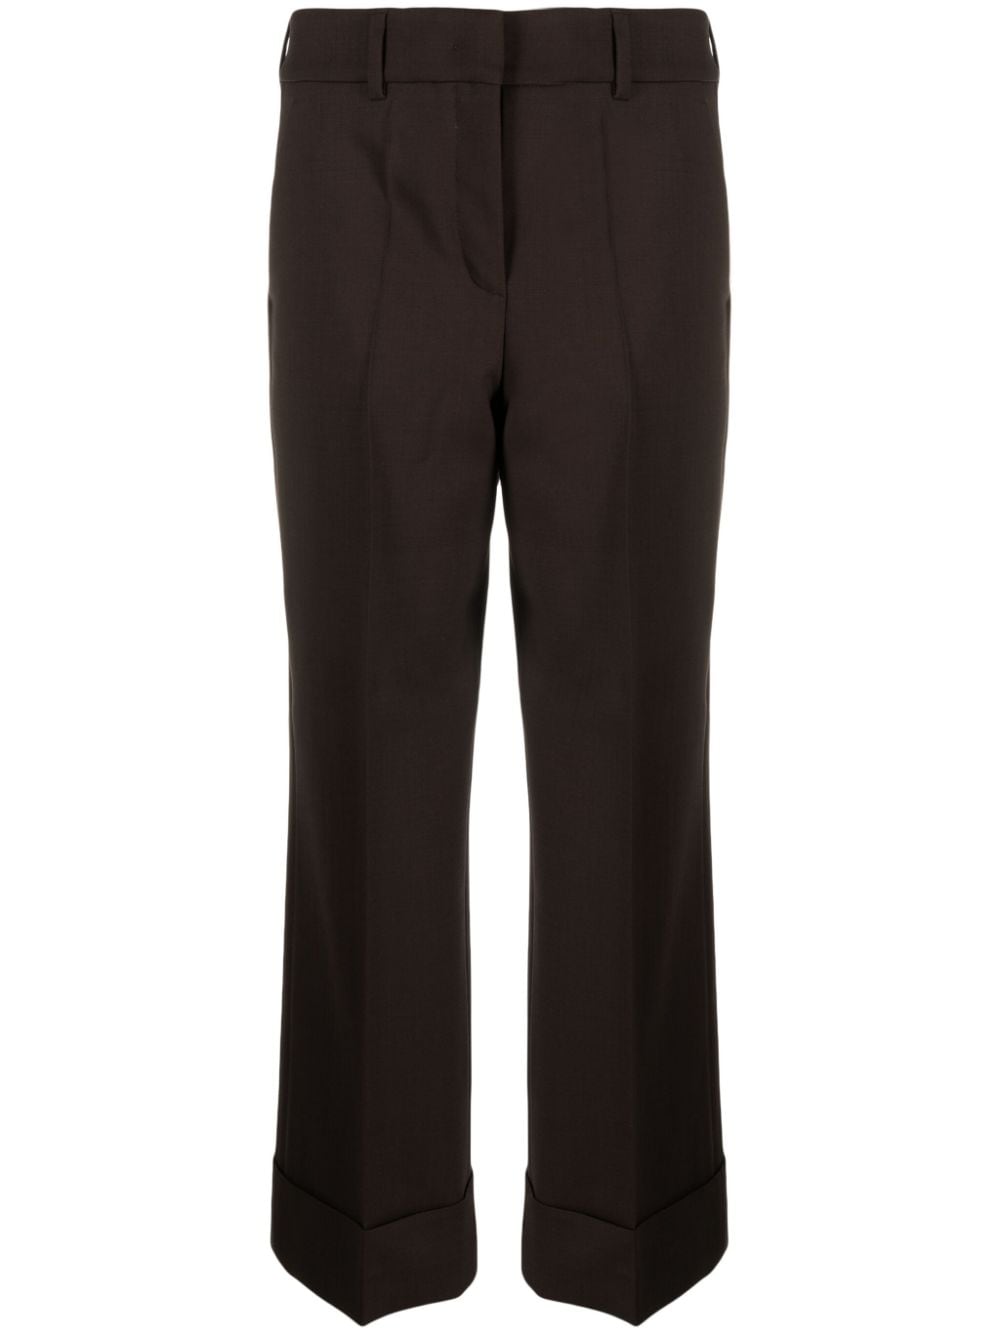 Incotex tailored cropped trousers - Brown von Incotex